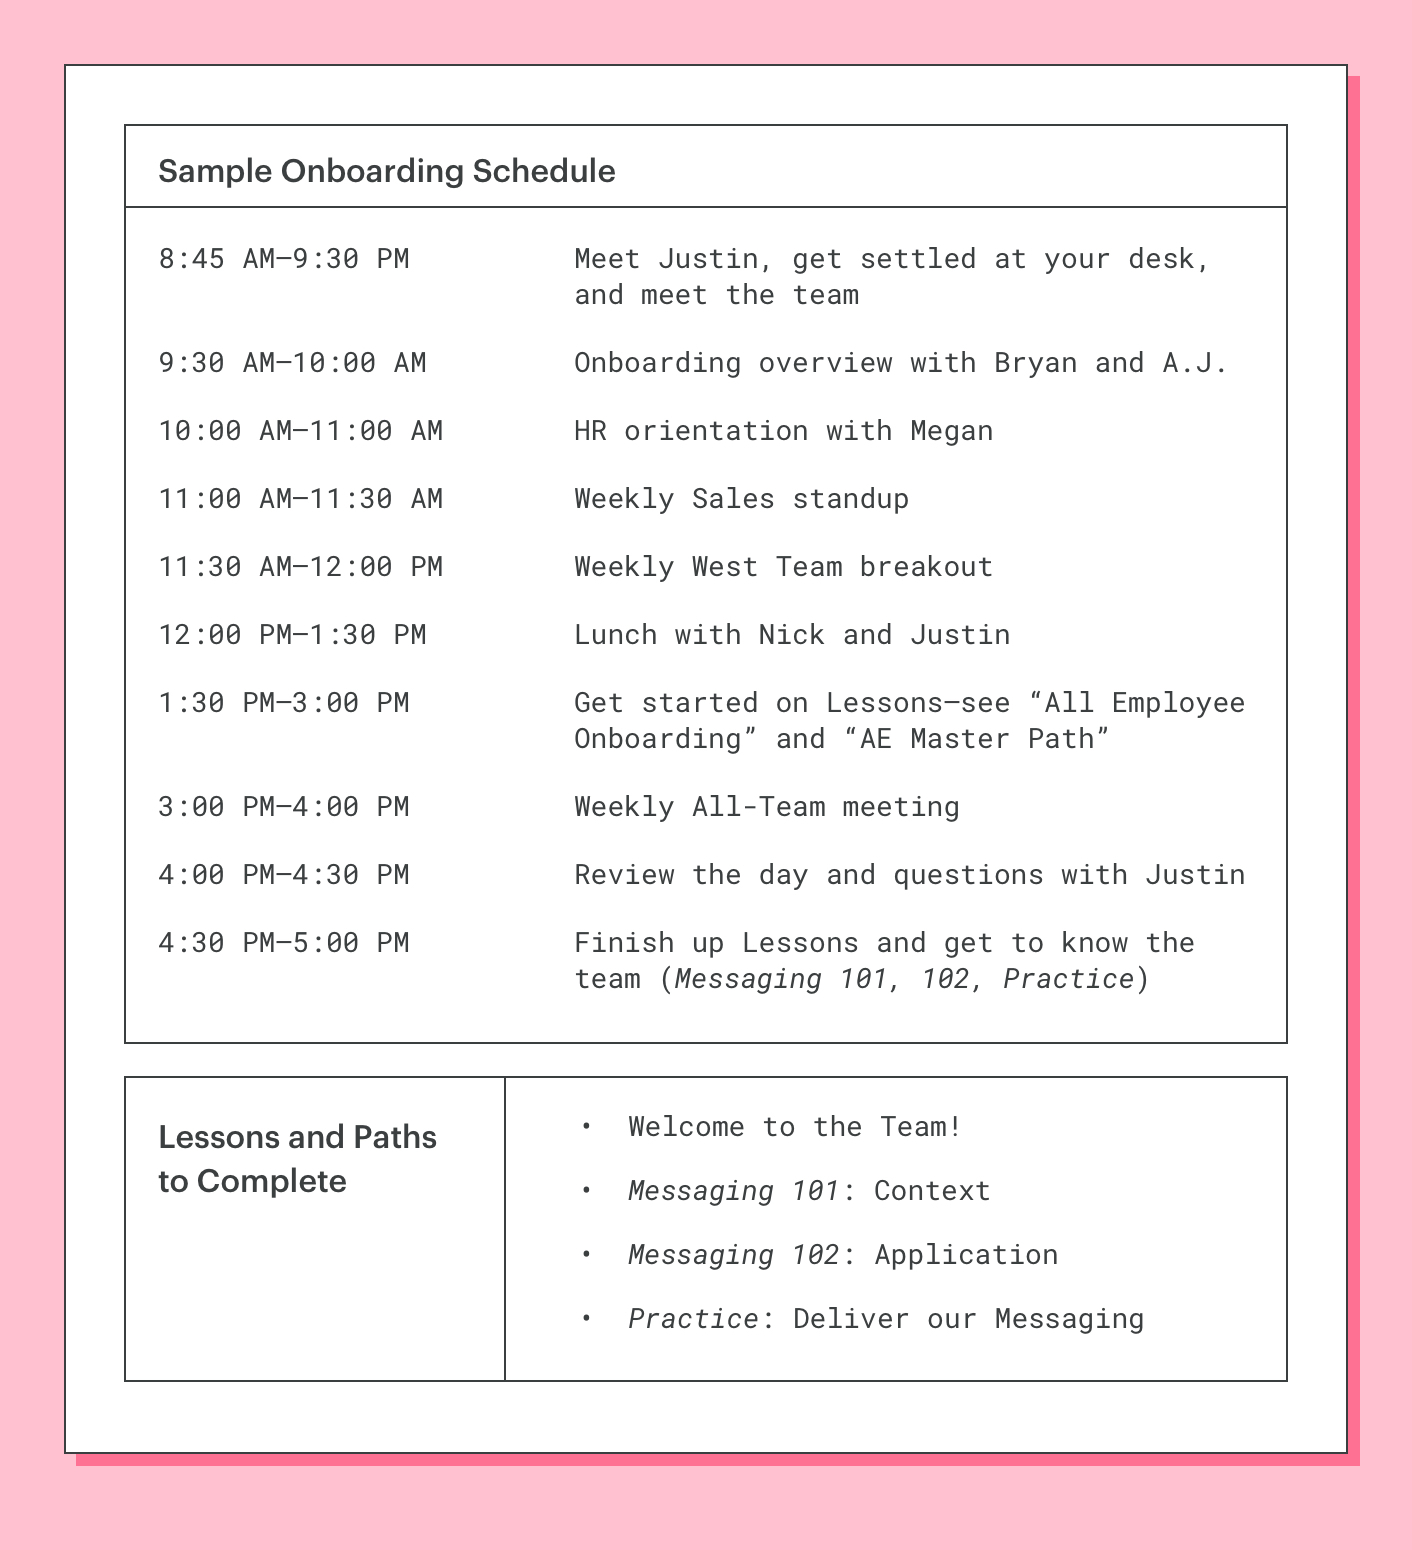 lessonly's sales onboarding schedule